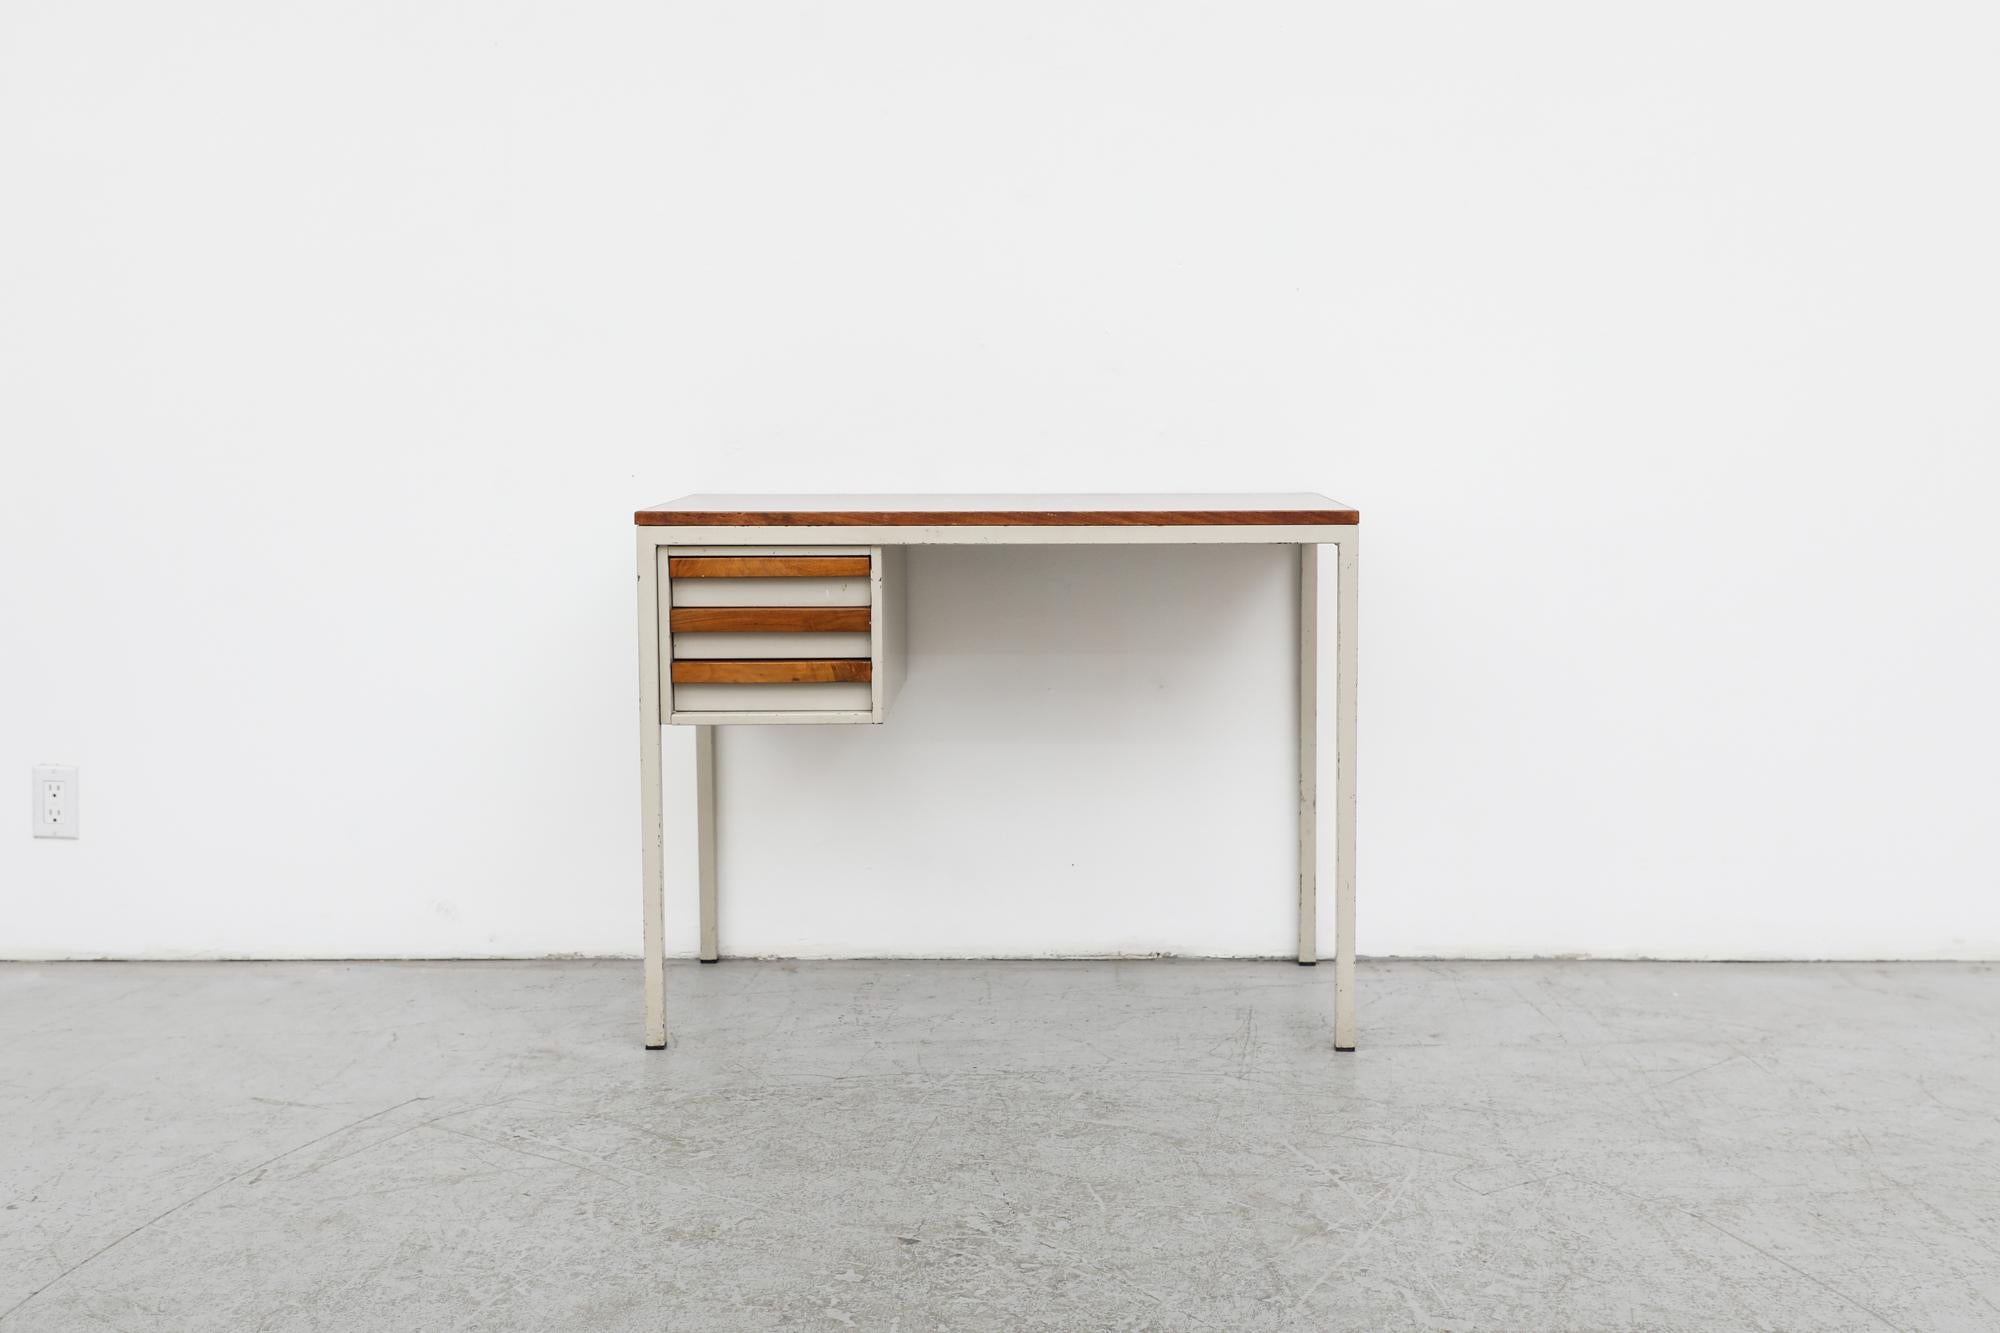 Beautiful Industrial writing desk designed by Coen de Vries for Emmein Staal. Grey eneameld metal frame with one set of side drawers and wooden top with wood accents. In original condition with wear consistent with age and use. Similar desks also